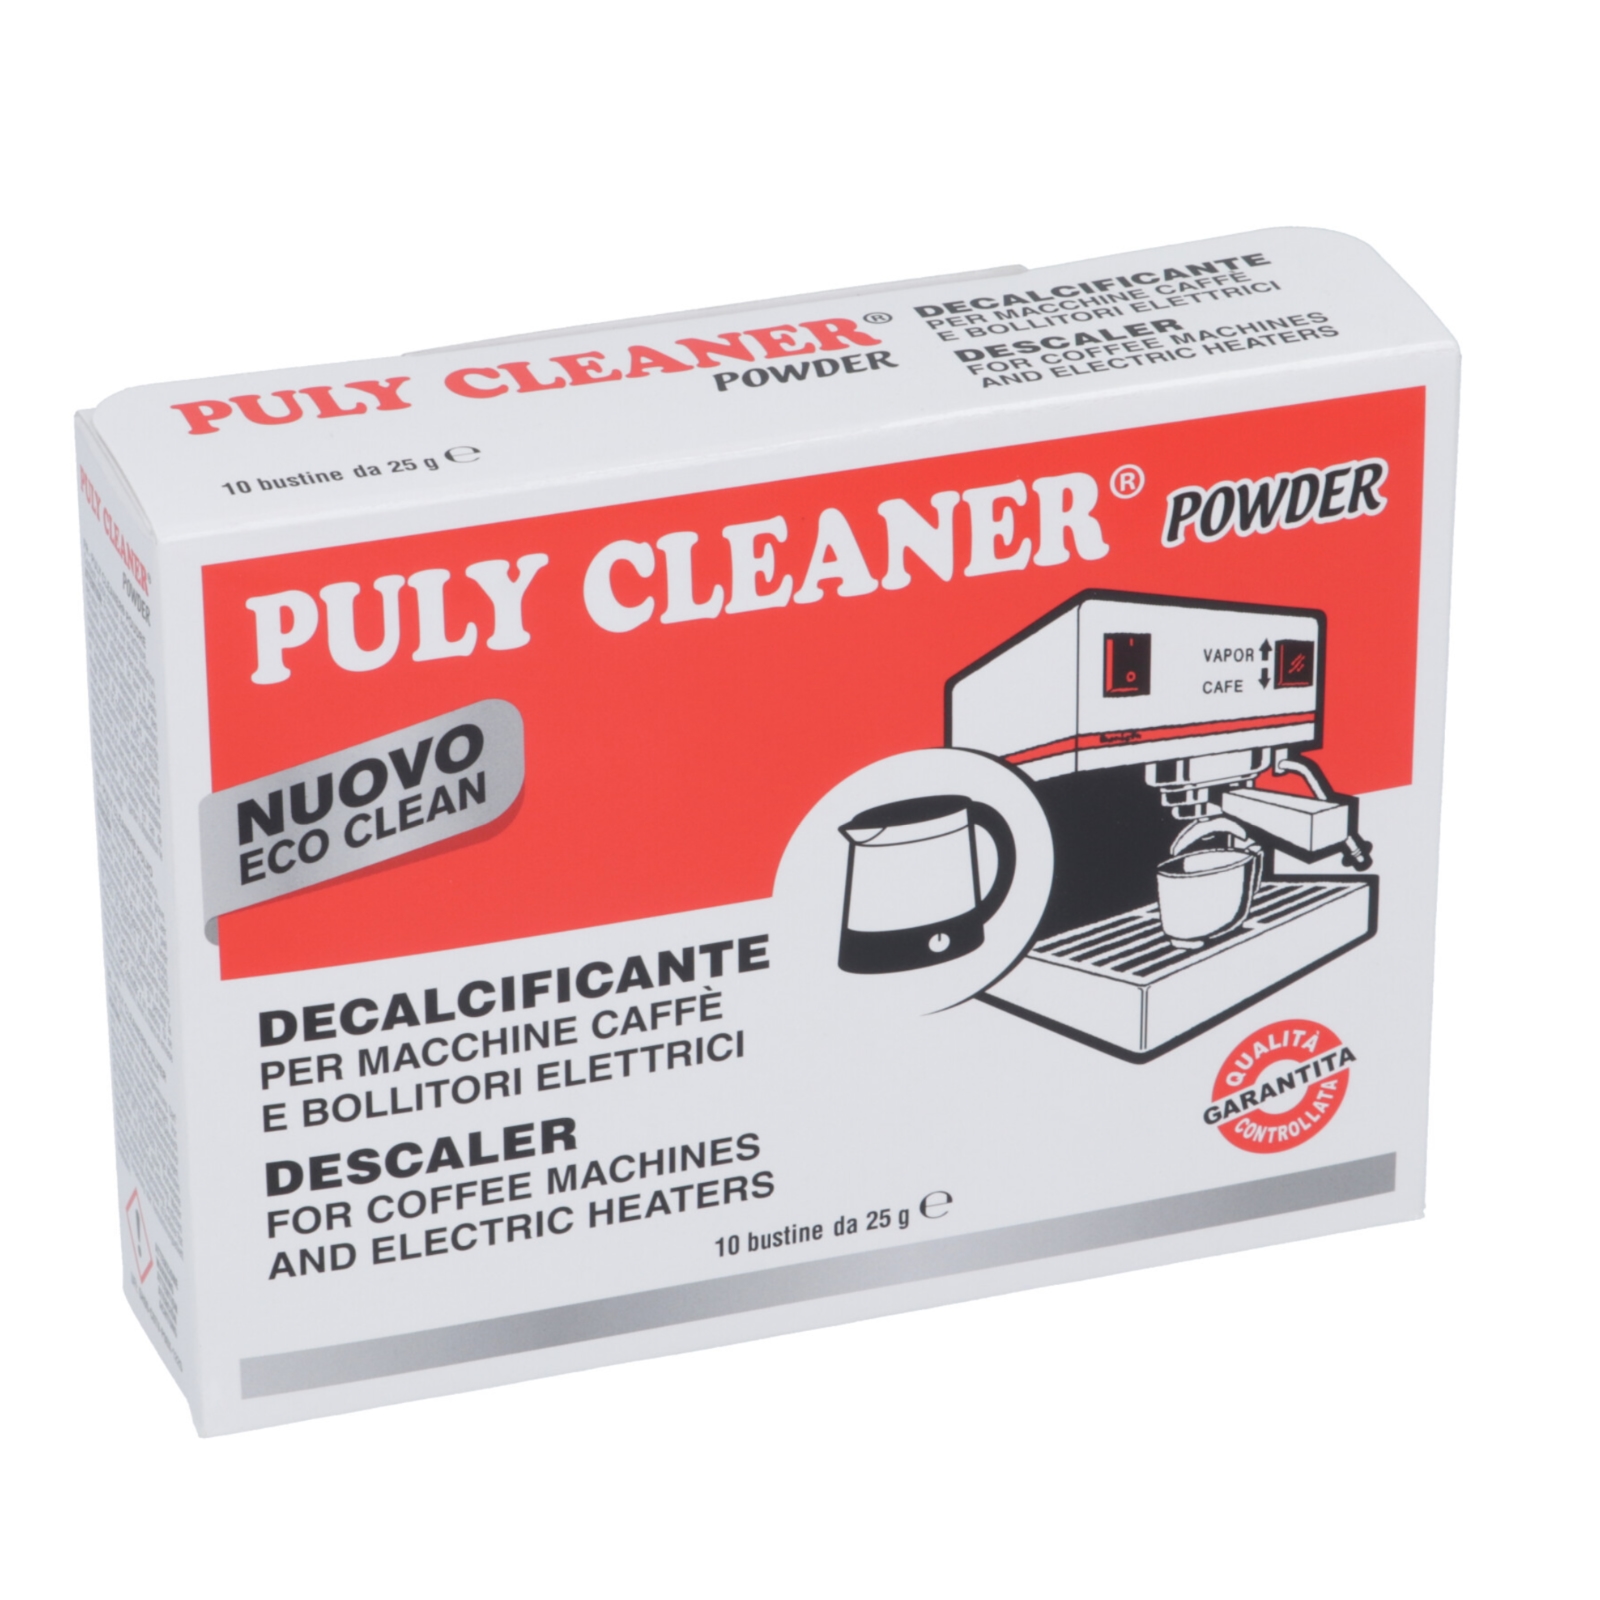 Descaler for coffee machines „Puly Cleaner"® Powder , 10x25 g